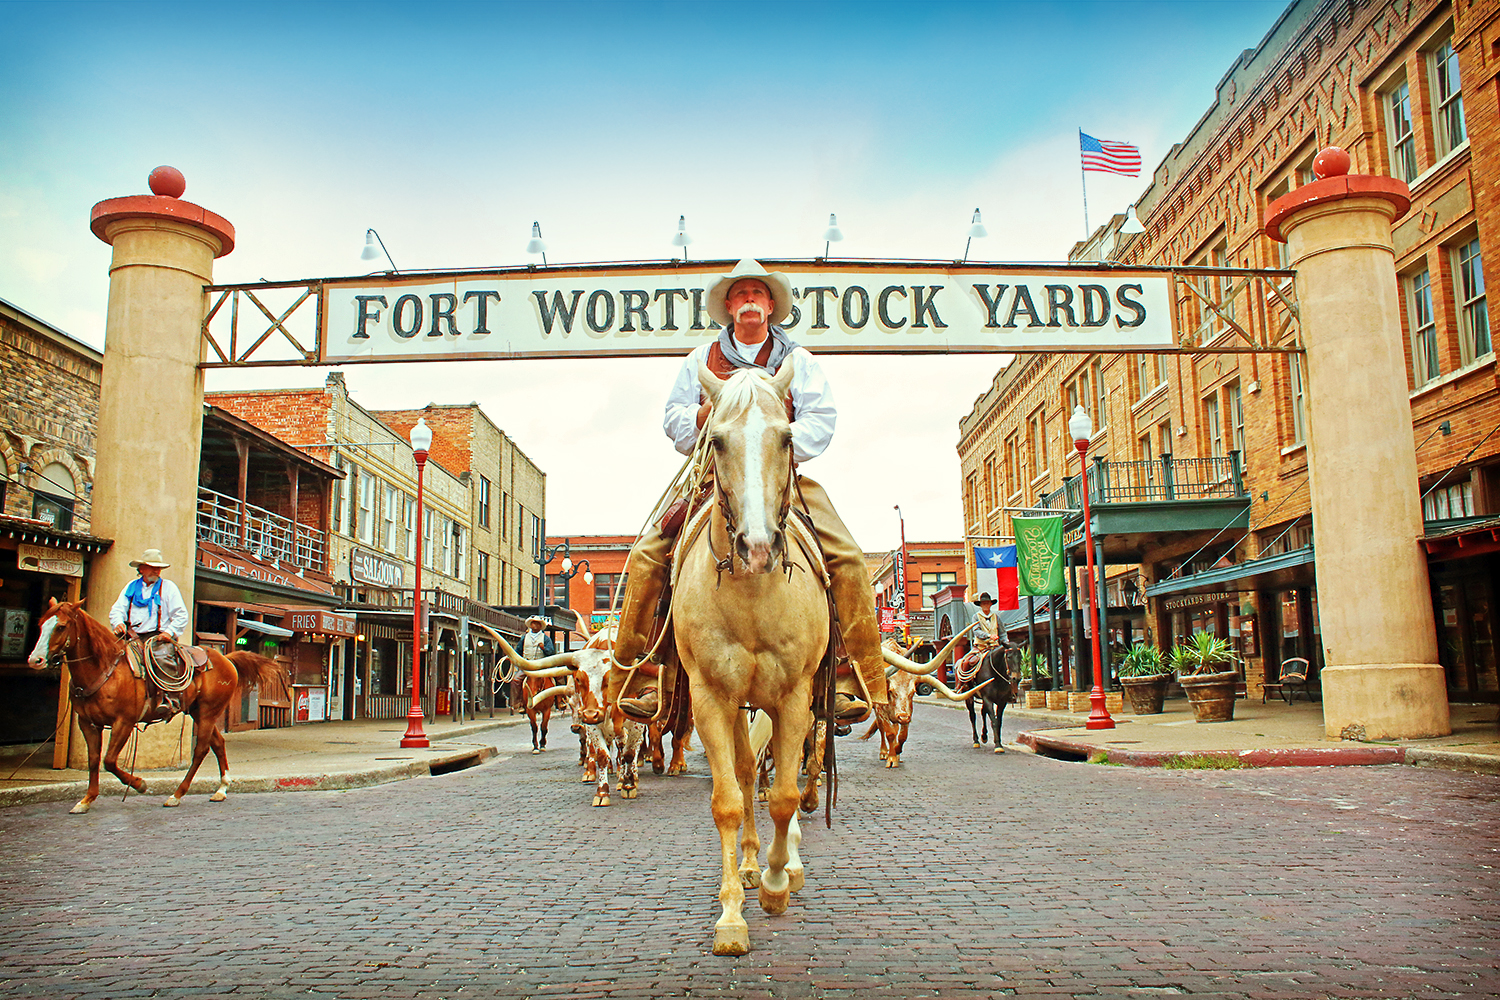 Discover The Modern West In Fort Worth, Texas The Unexpected City!